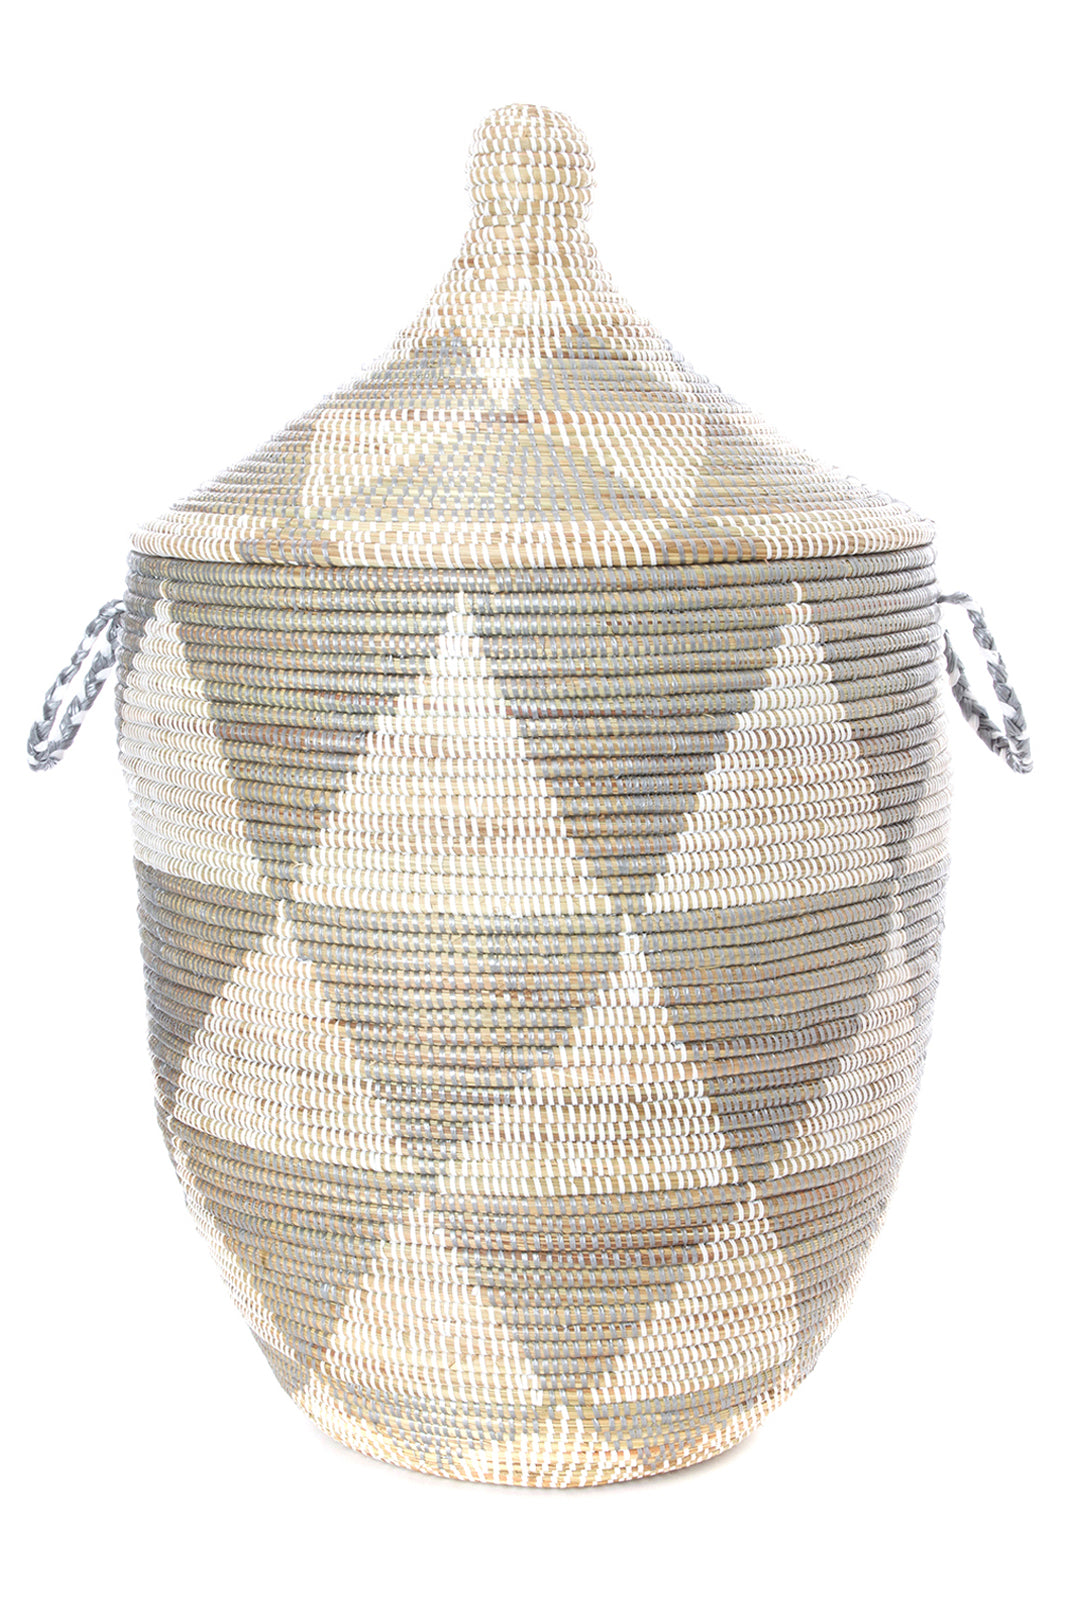 Large Silver and White Triangle Lidded Basket